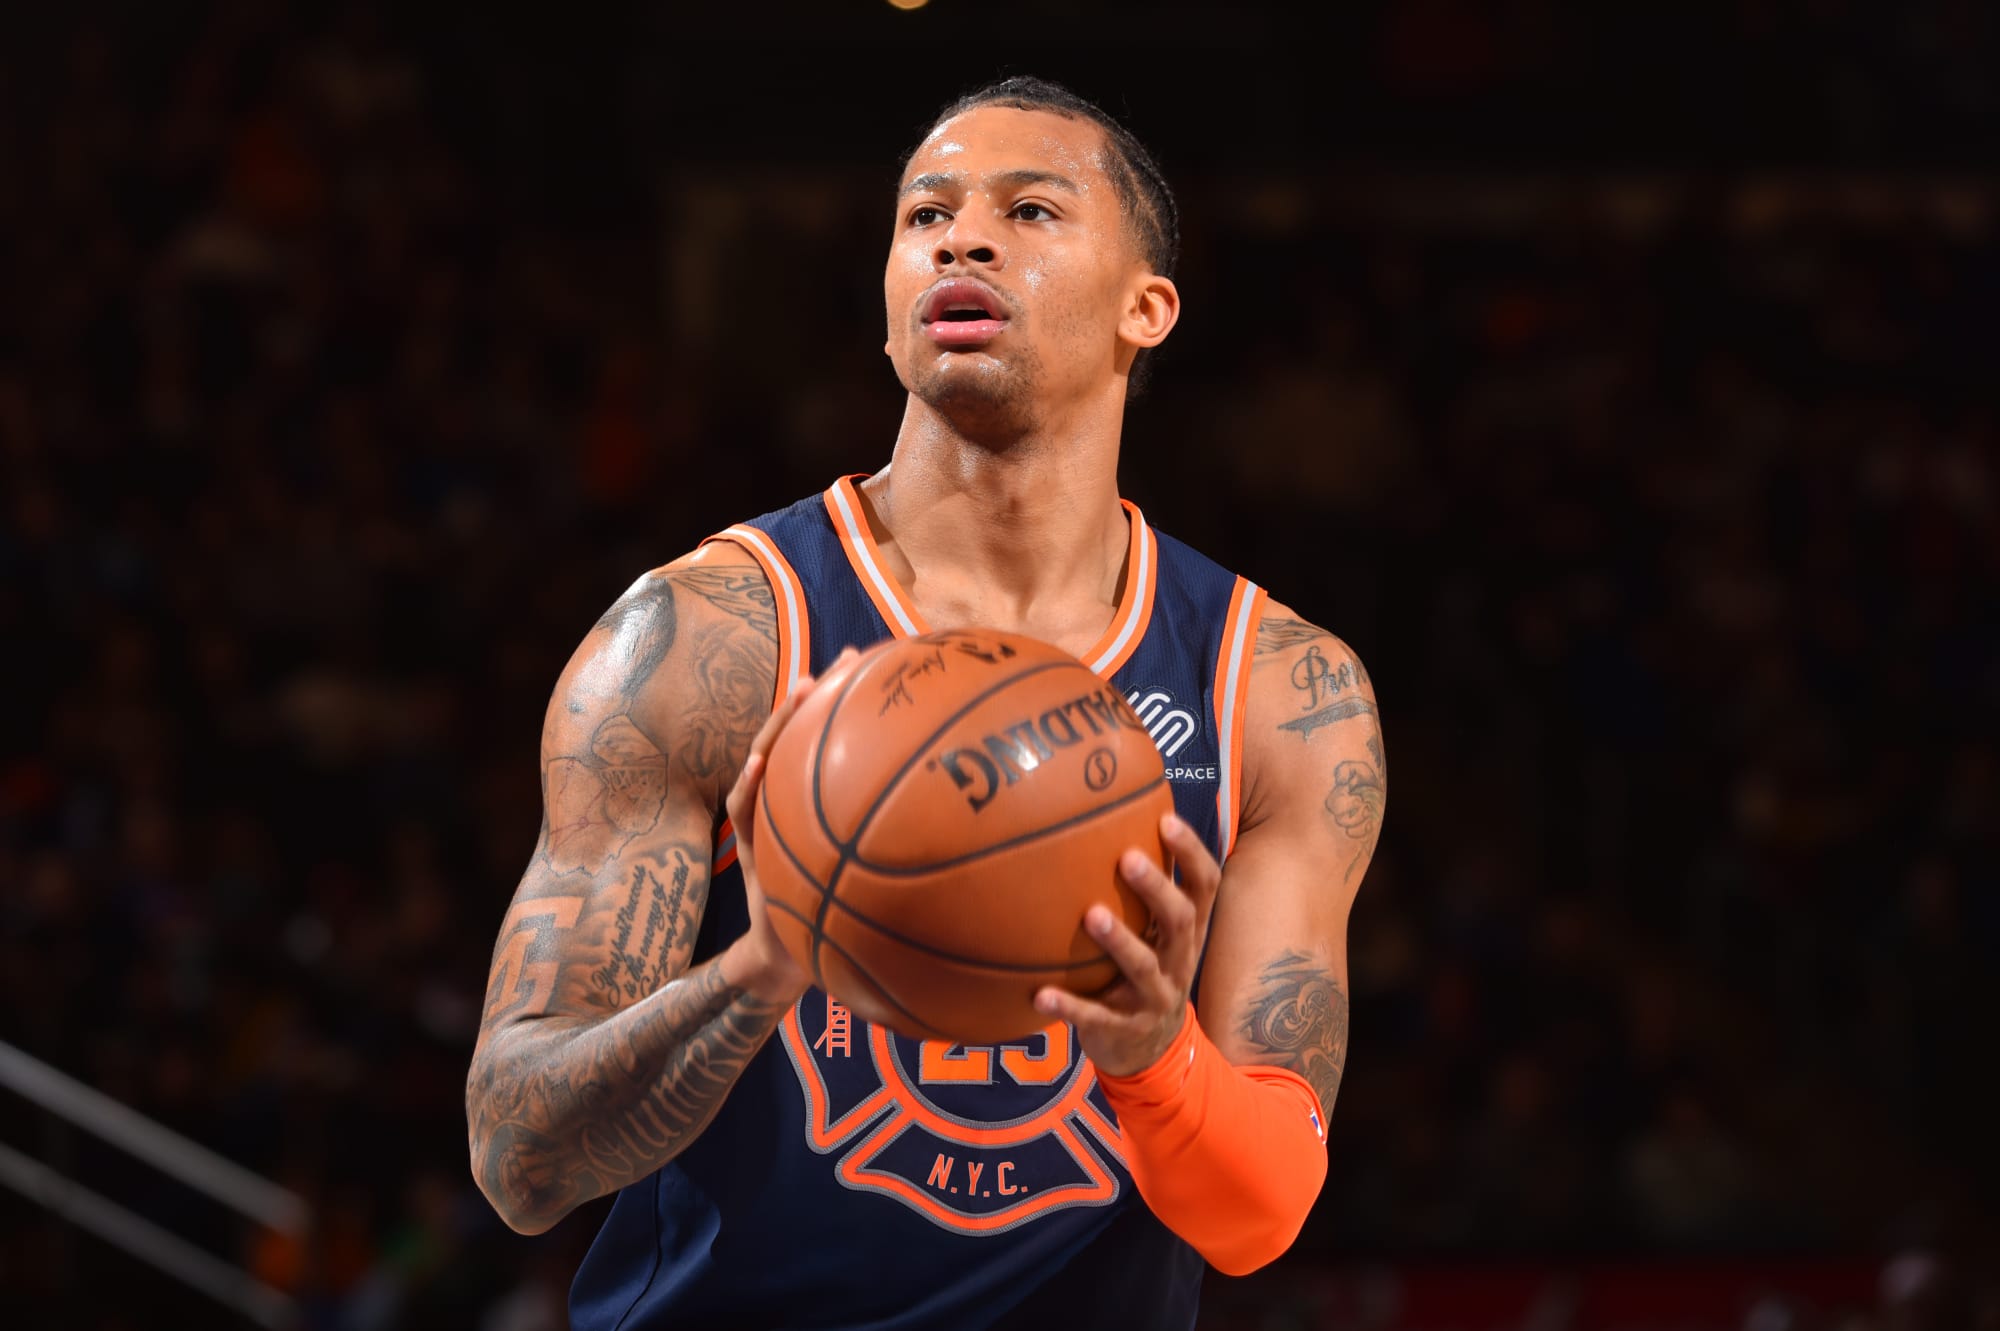 New York Knicks: Where does Trey Burke fit in the long-term plan?